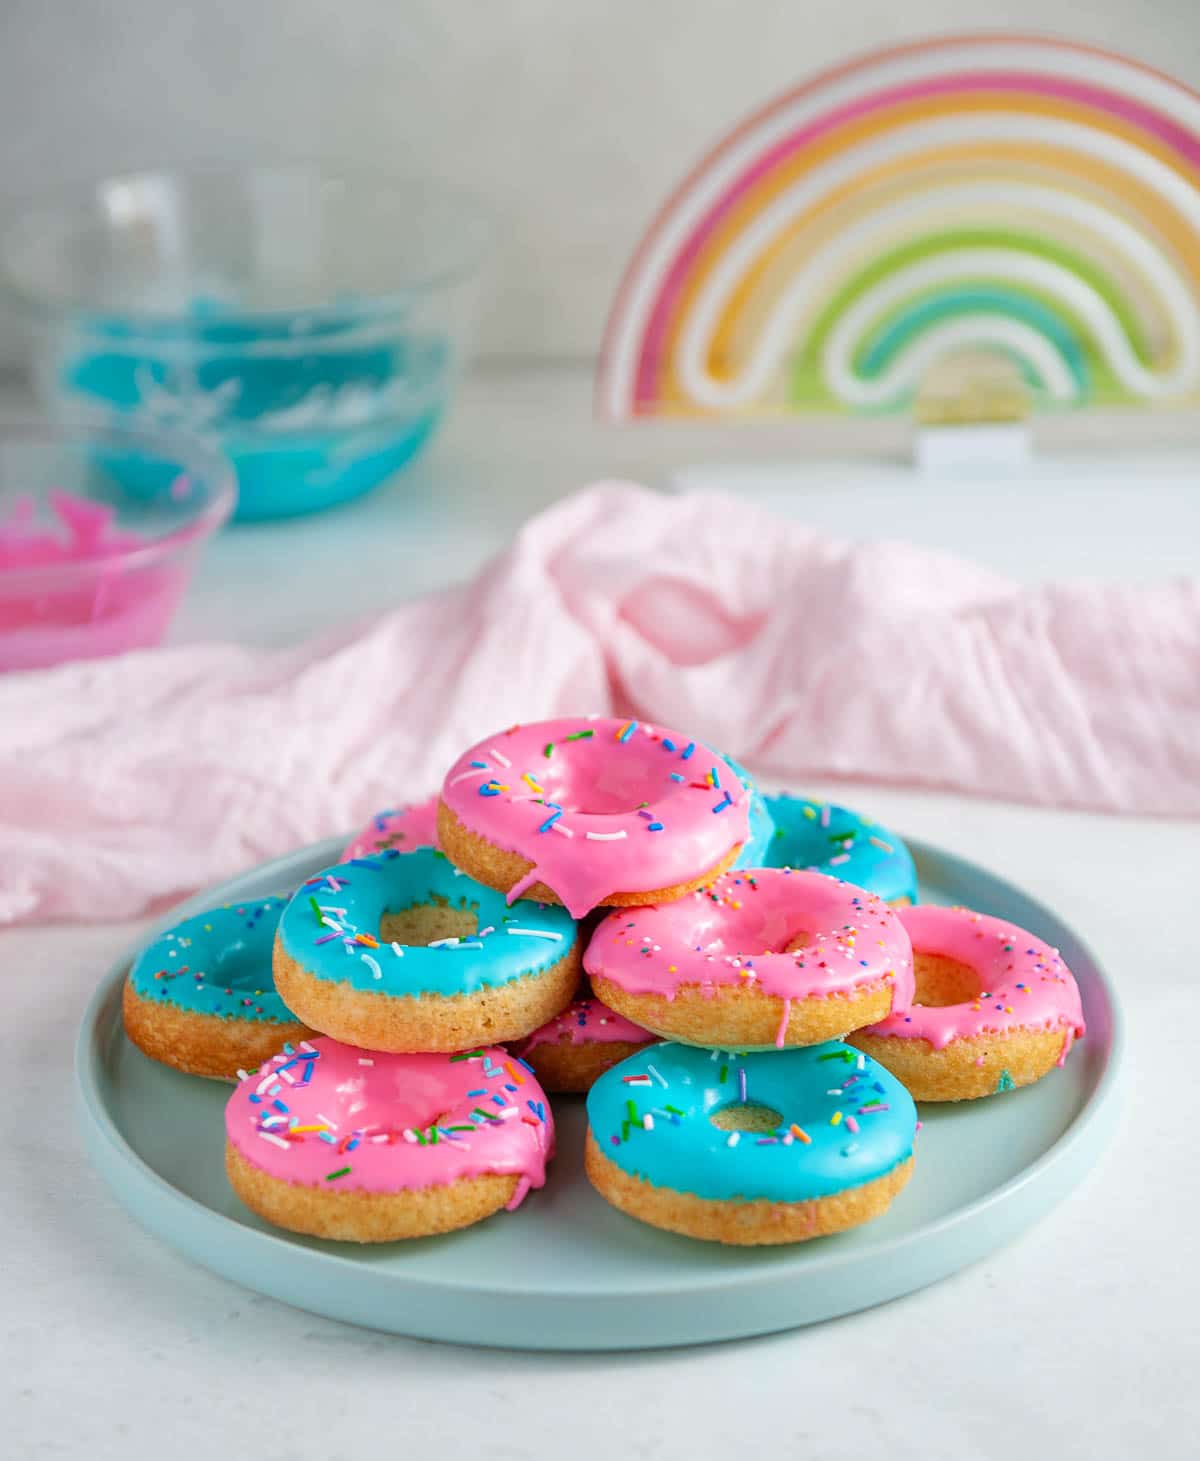 pink and blue donuts on a blue plate